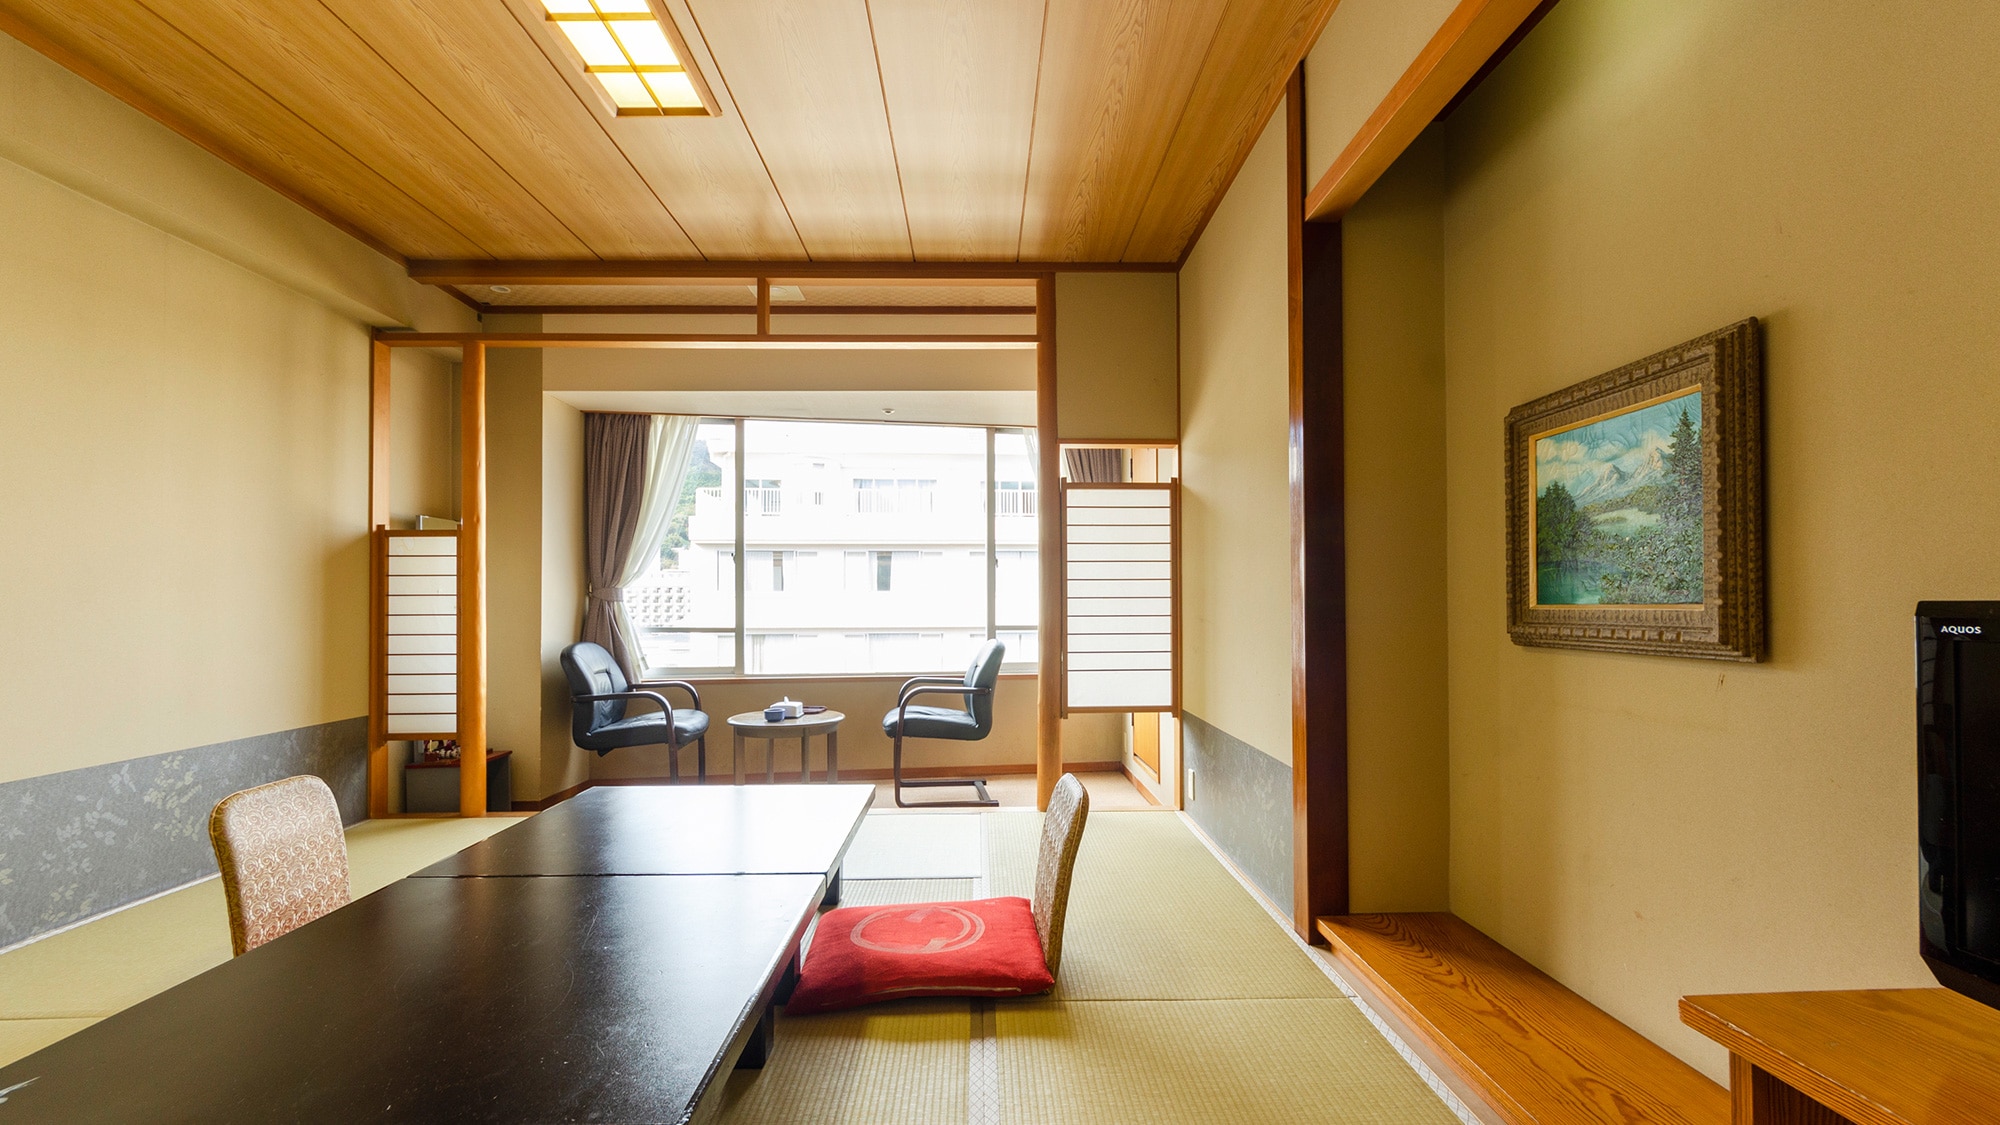 ◆ Central East Building Japanese-style room 8 tatami mats (E) (Wi-Fi available)